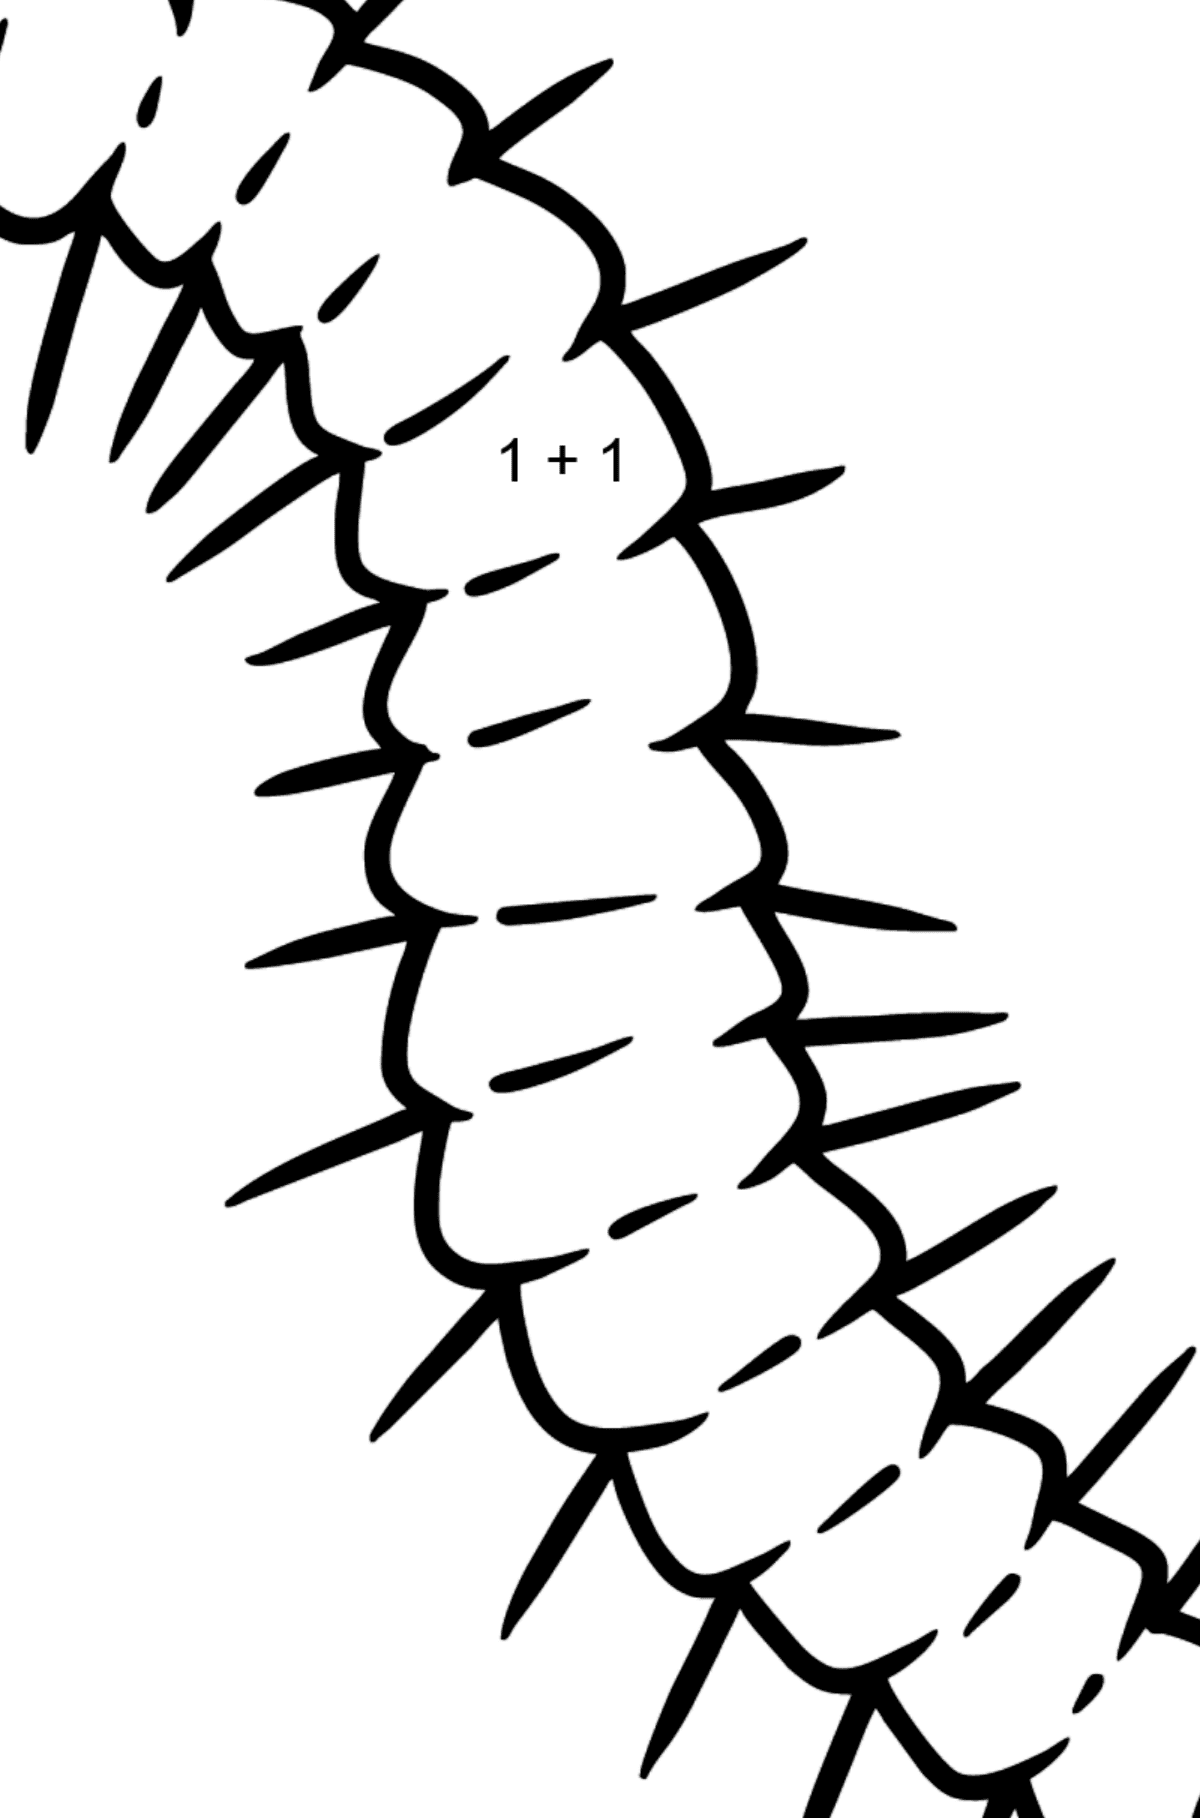 Centipede coloring page - Math Coloring - Addition for Kids